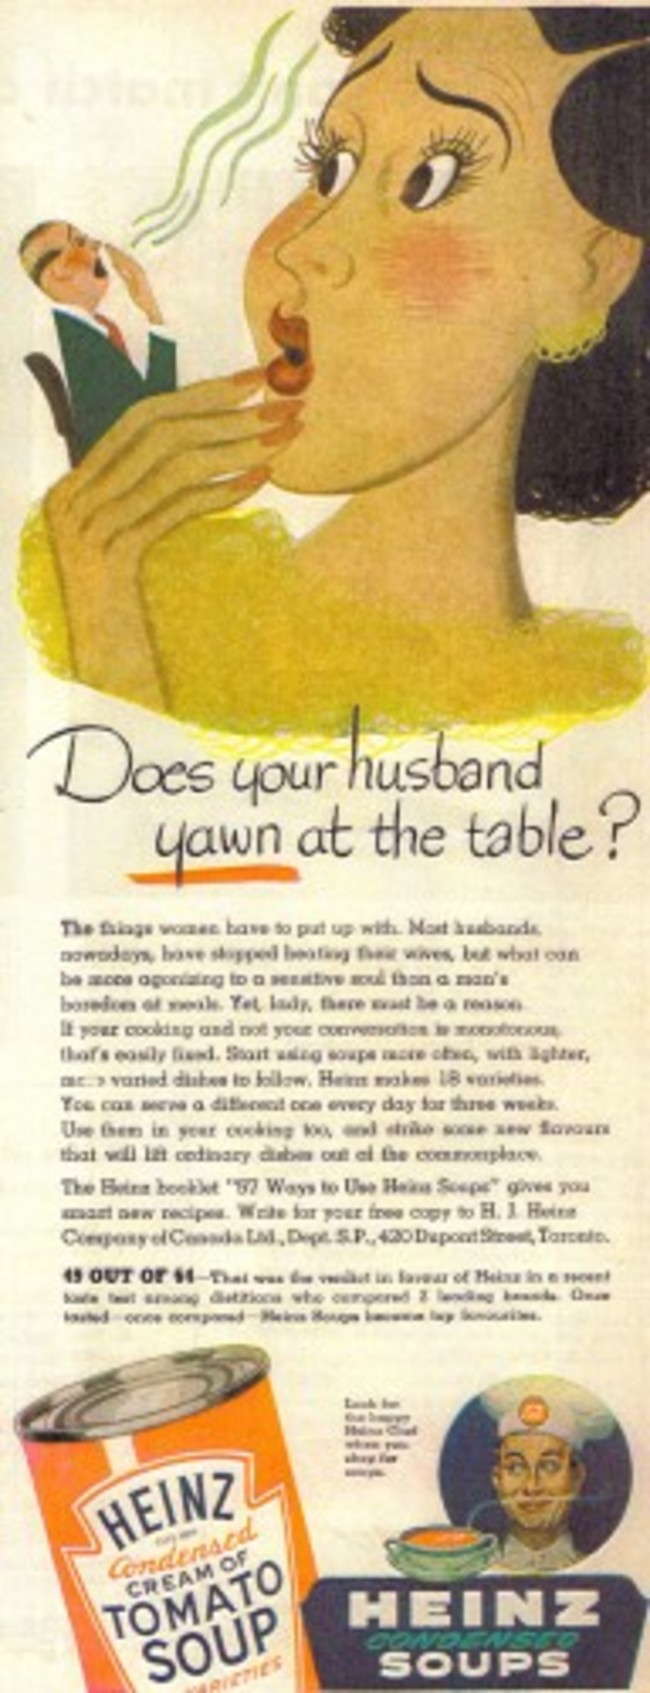 heinz-1950-the-ad-begins-most-husbands-nowadays-have-stopped-beating-their-wives-